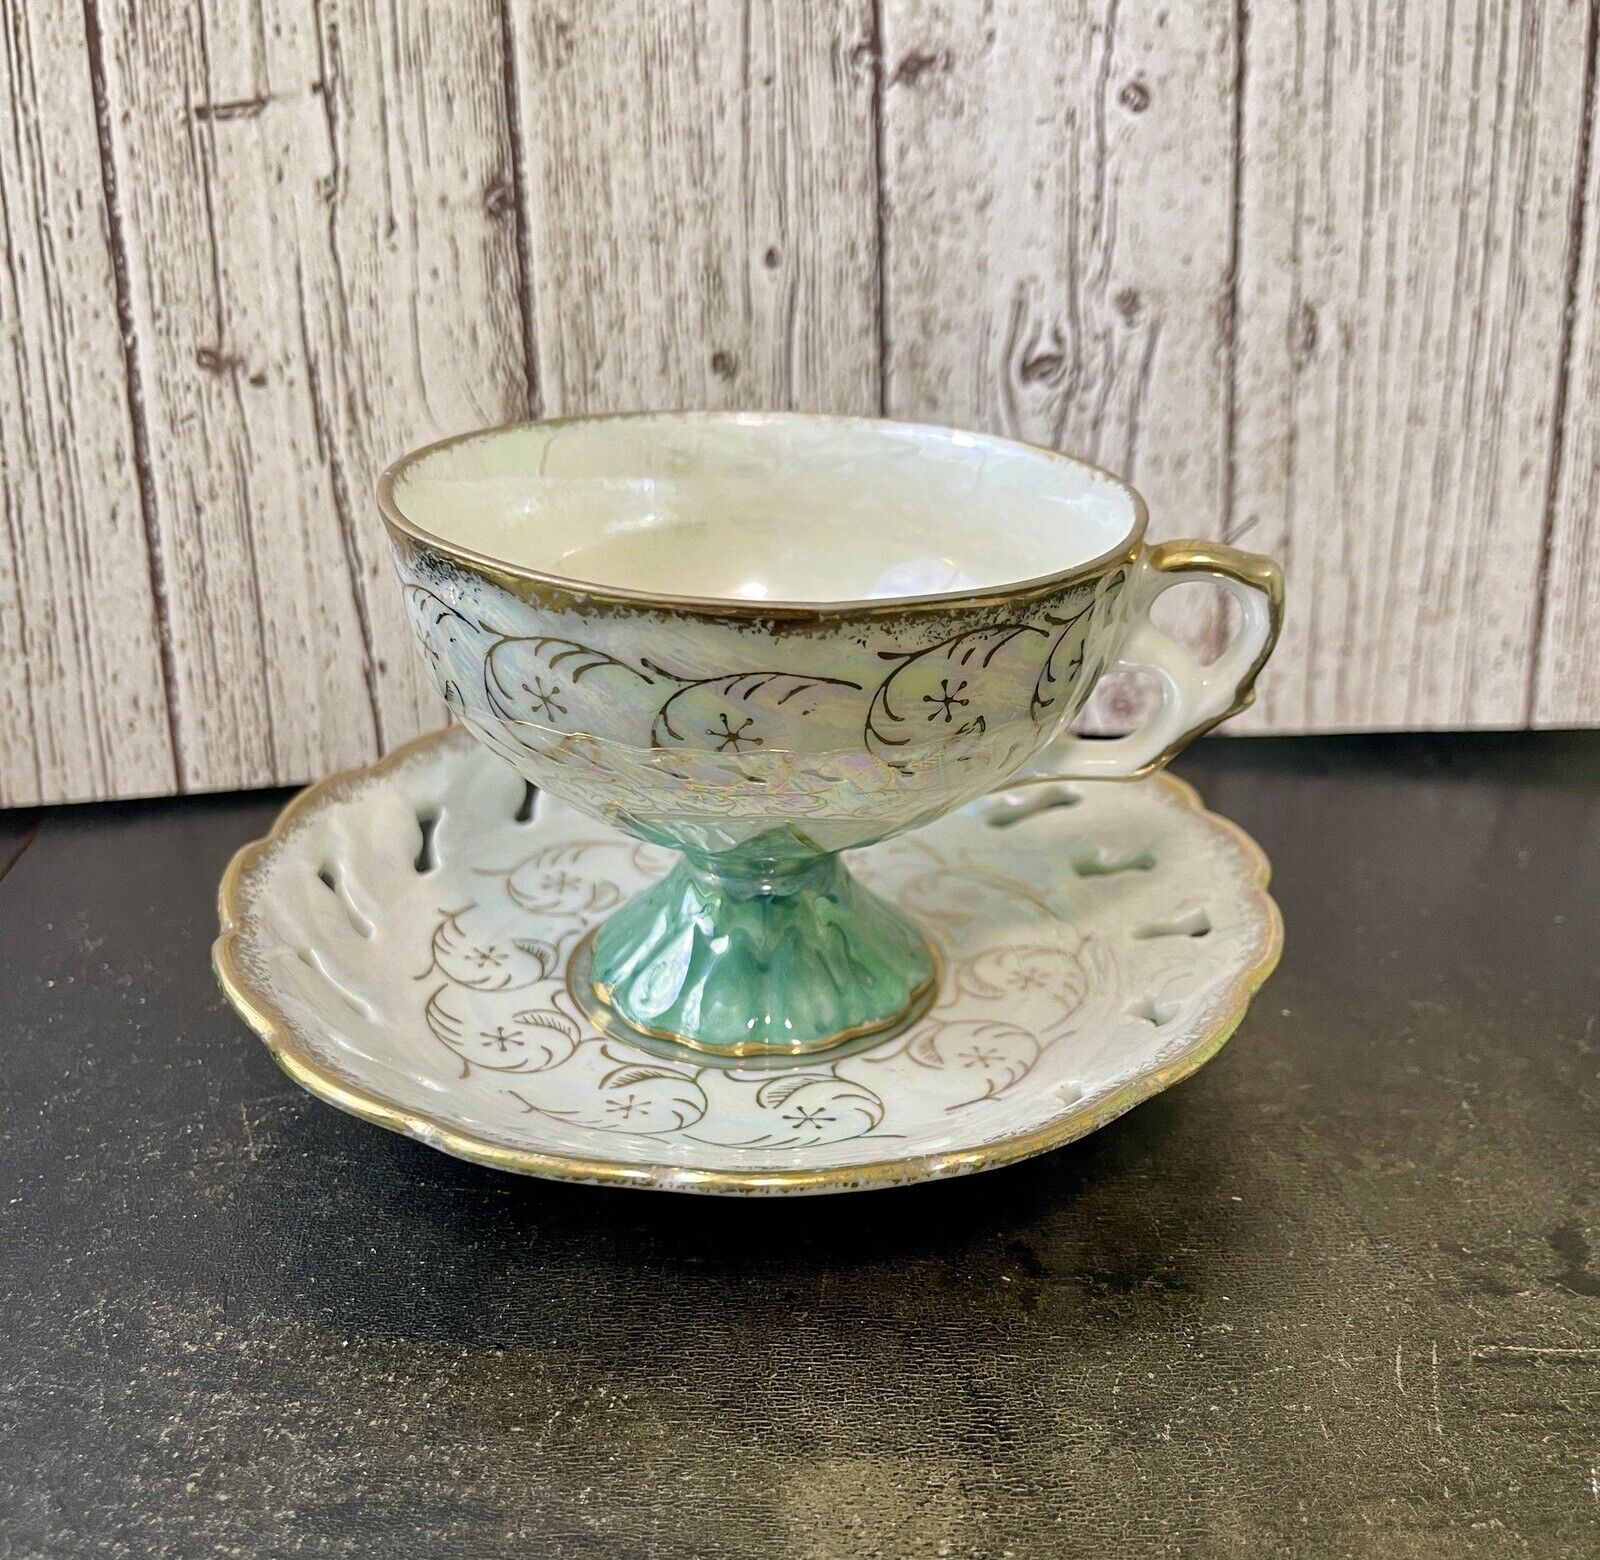 ENESCO vintage 1960’s Lusterware Footed Cup Reticulated Saucer Light Green